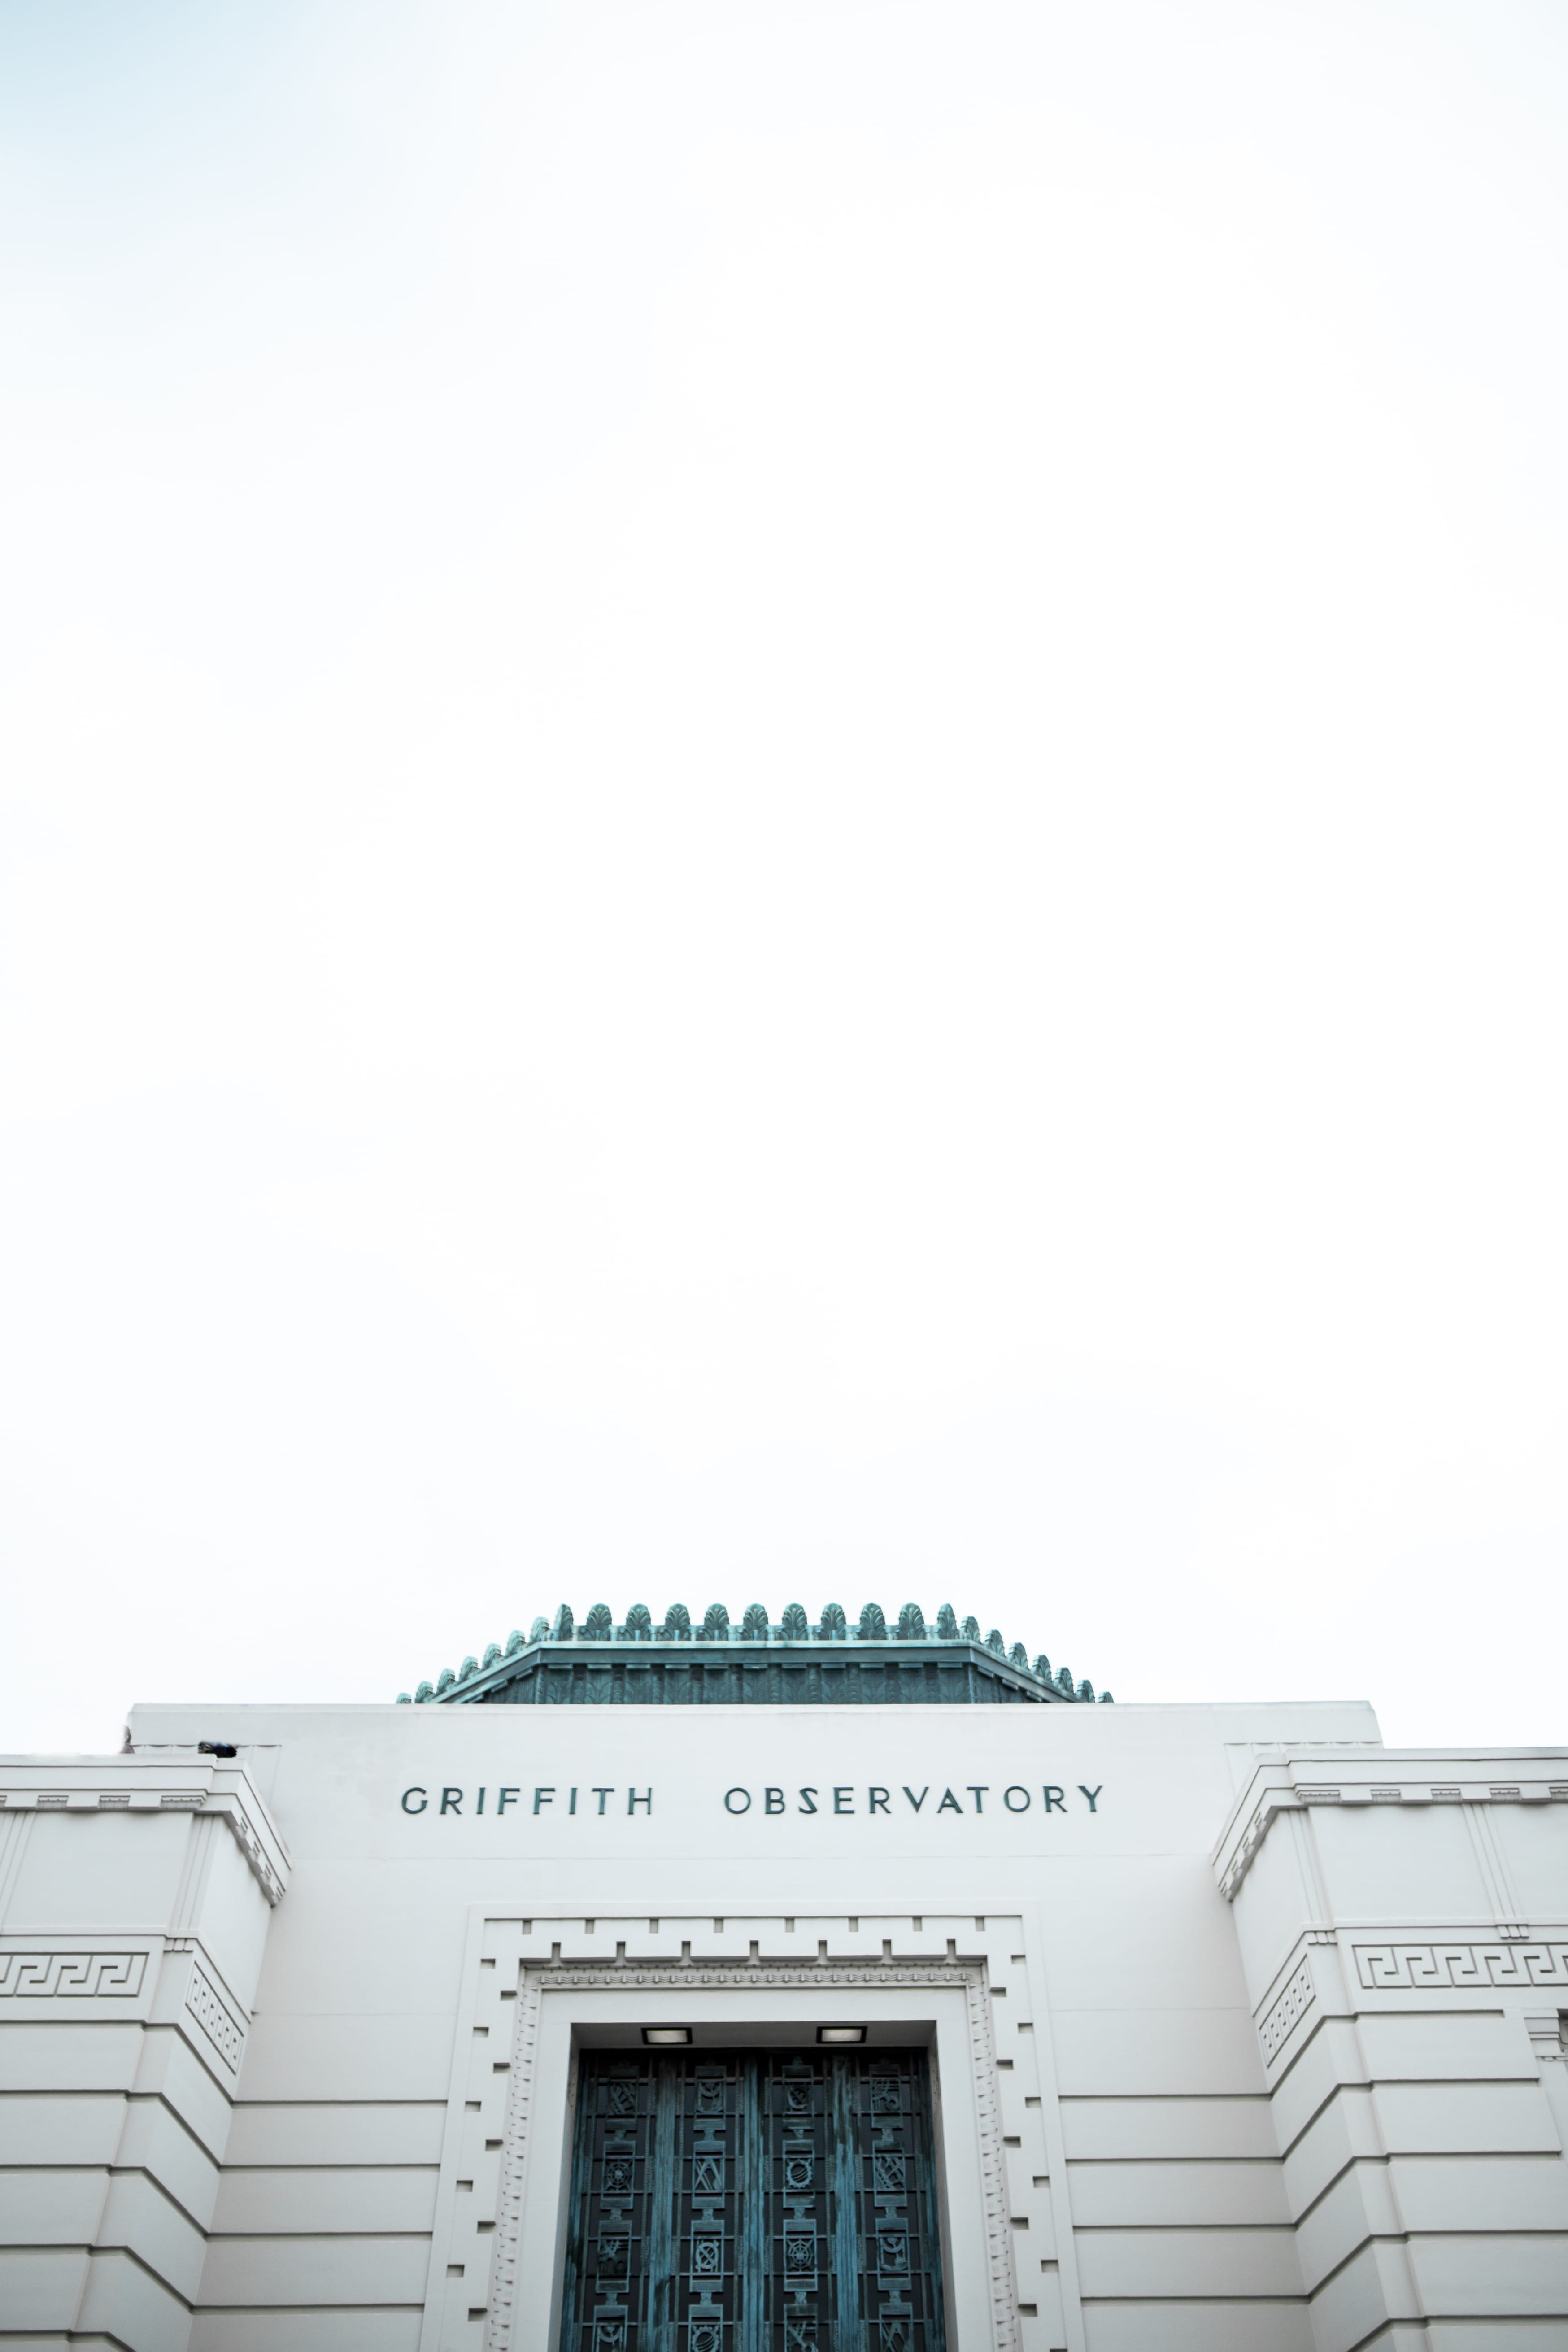 low angle photo of Griffith Observatory, Griffin Observatory building